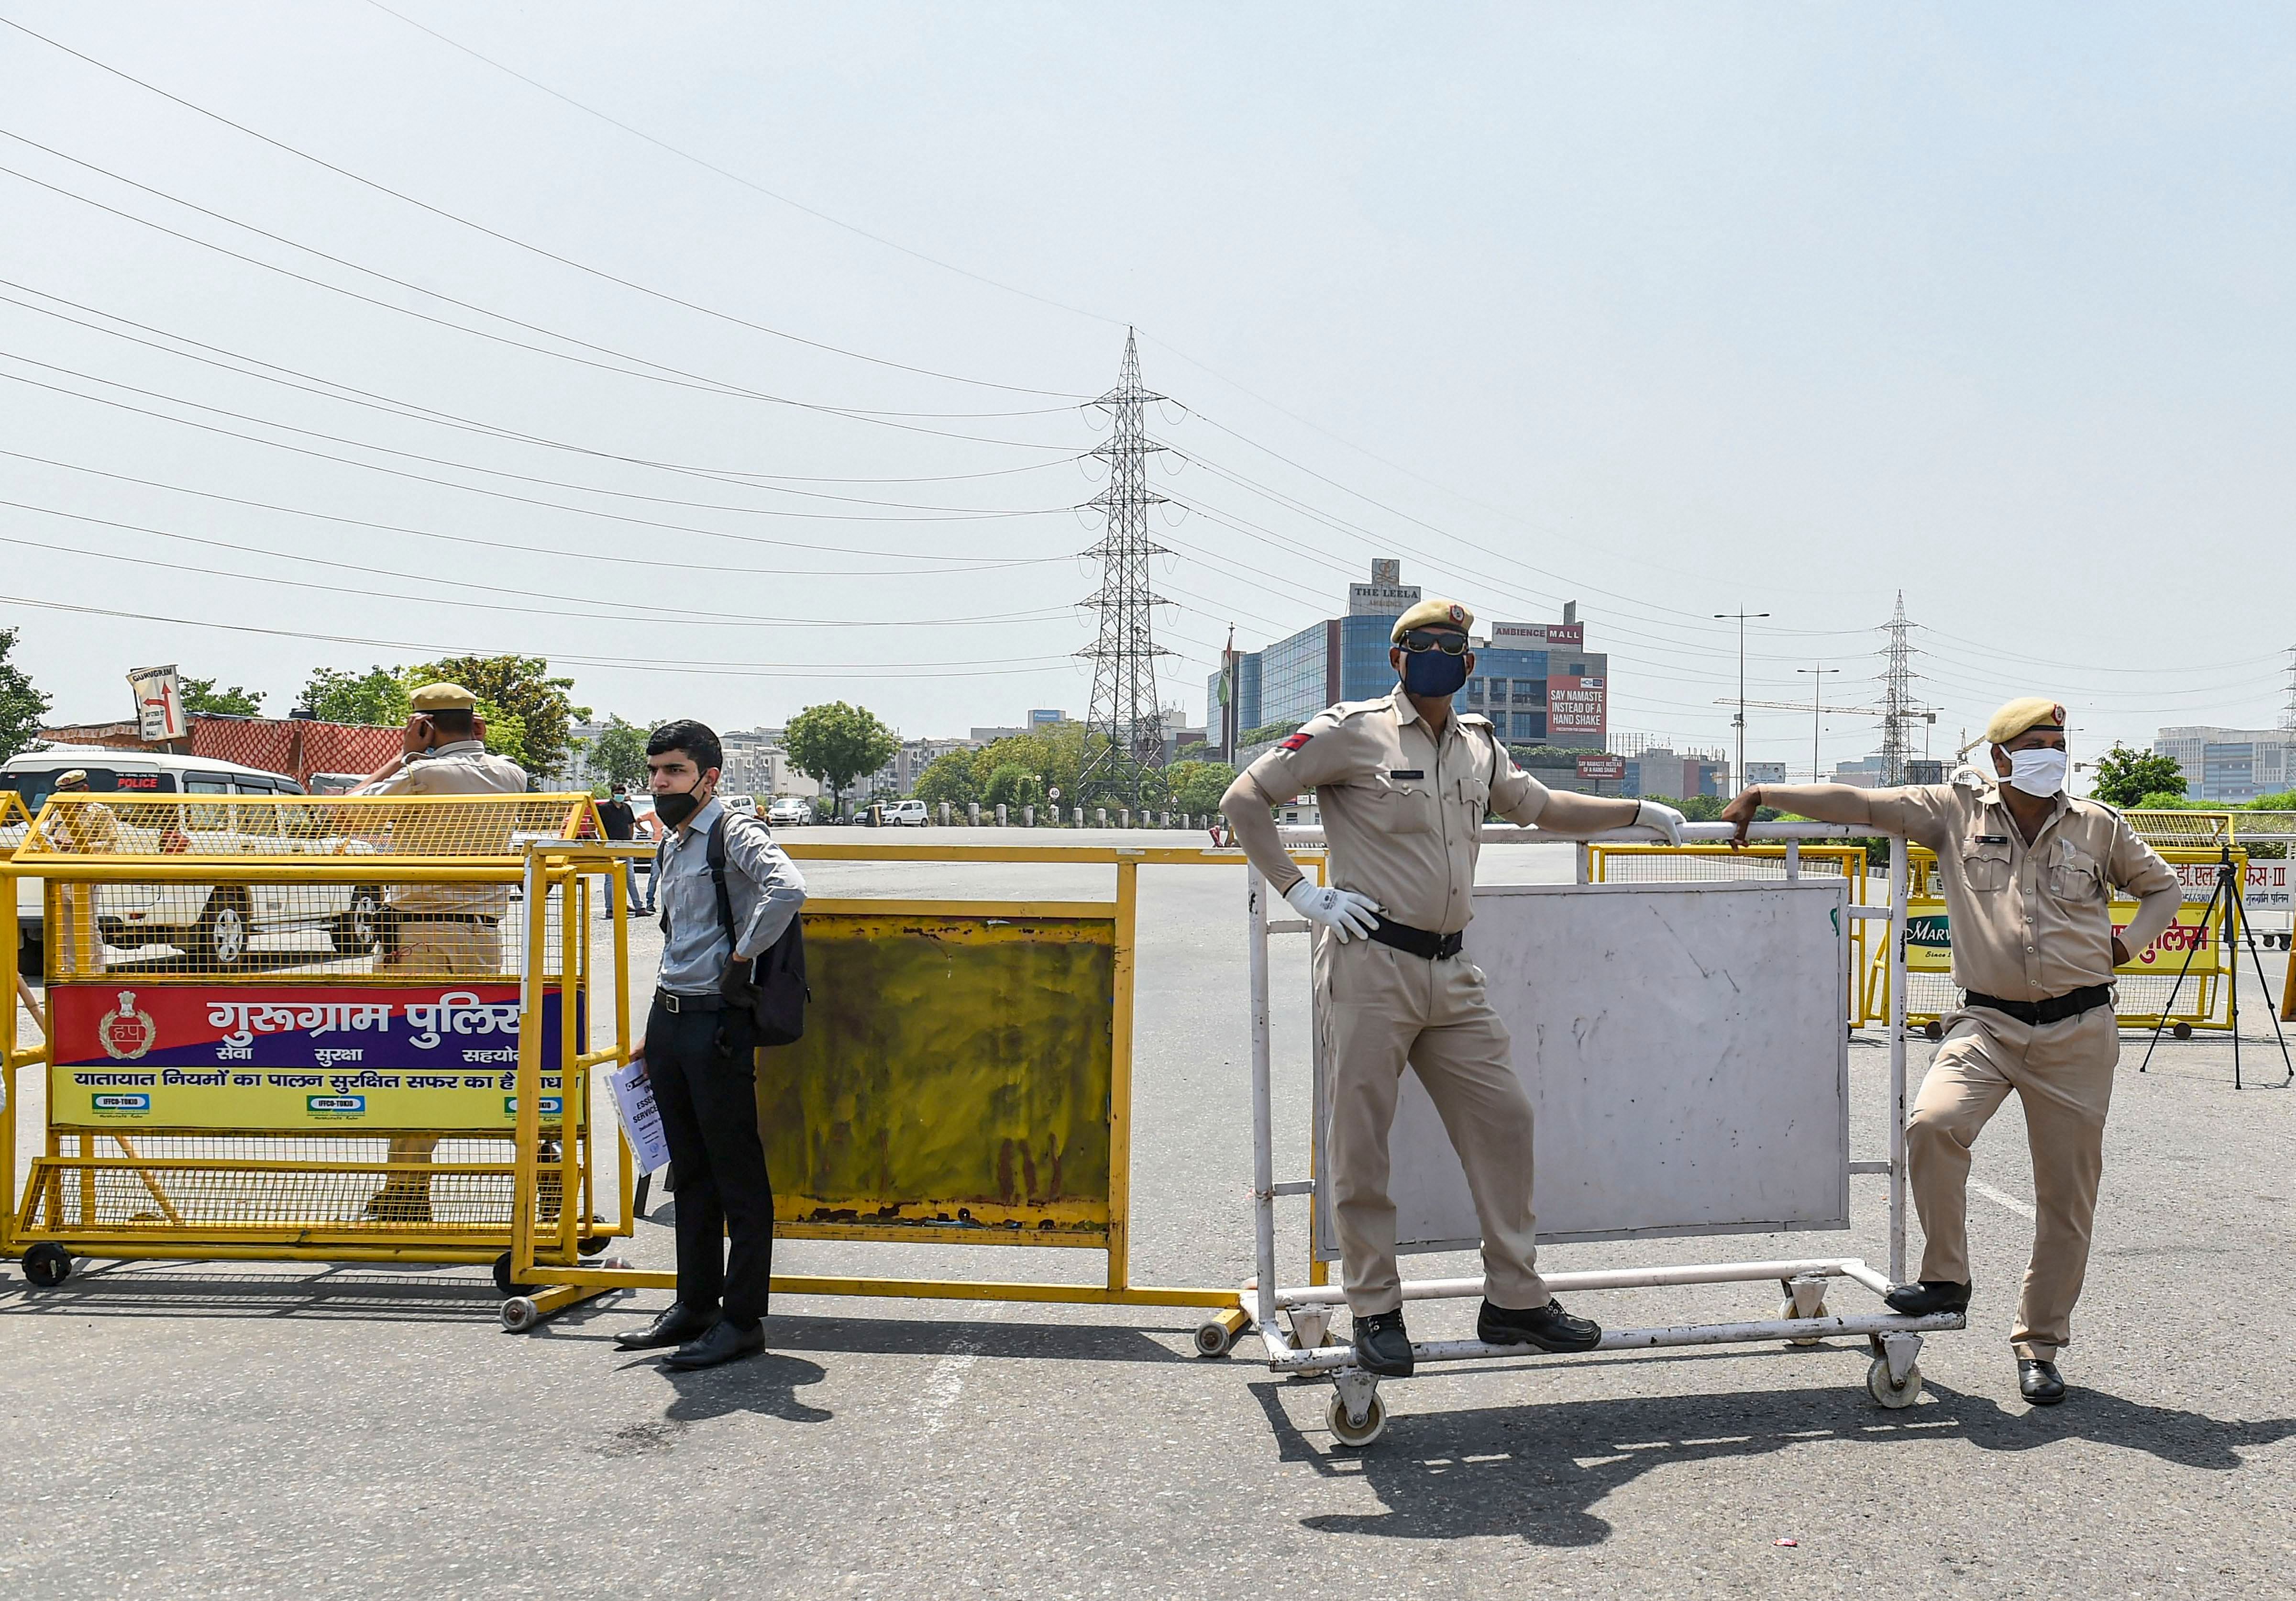 Policemen stand guard near barricades set up after Haryana Government ordered to seal the Delhi-Gurugram border due to surge in COVID-19 cases, during the ongoing nationwide lockdown. (PTI Photo)